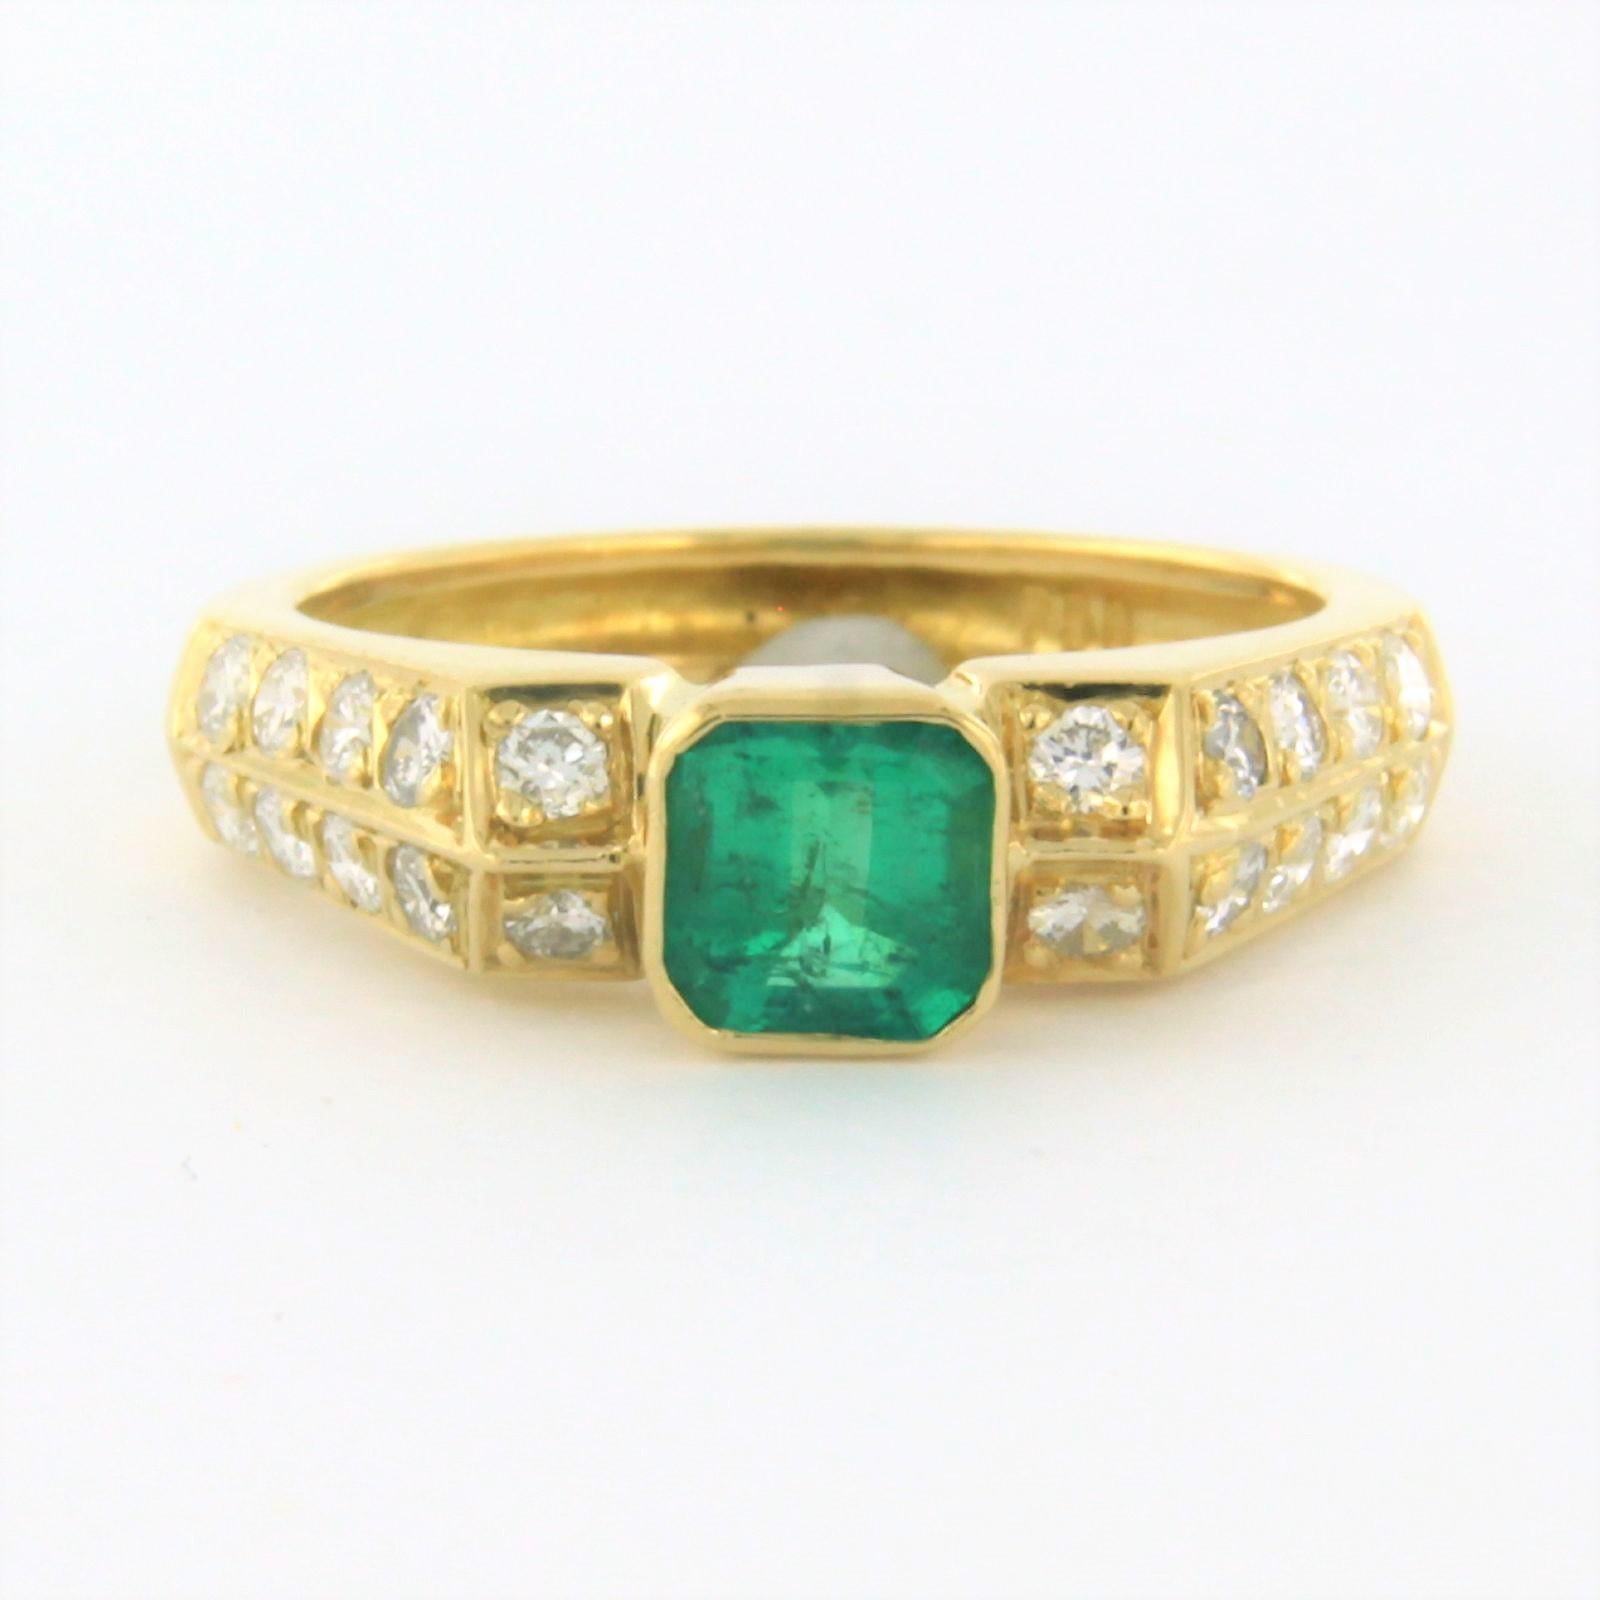 18 kt yellow gold ring set with emerald ​​and brilliant cut diamond - ring size U.S. 5.25 - EU. 16(50)

detailed description

The top of the ring is 5.5 mm wide and 5.0 mm high

weight 4.4 grams

ring size U.S. 5.25 - EU. 16(50), the ring can be